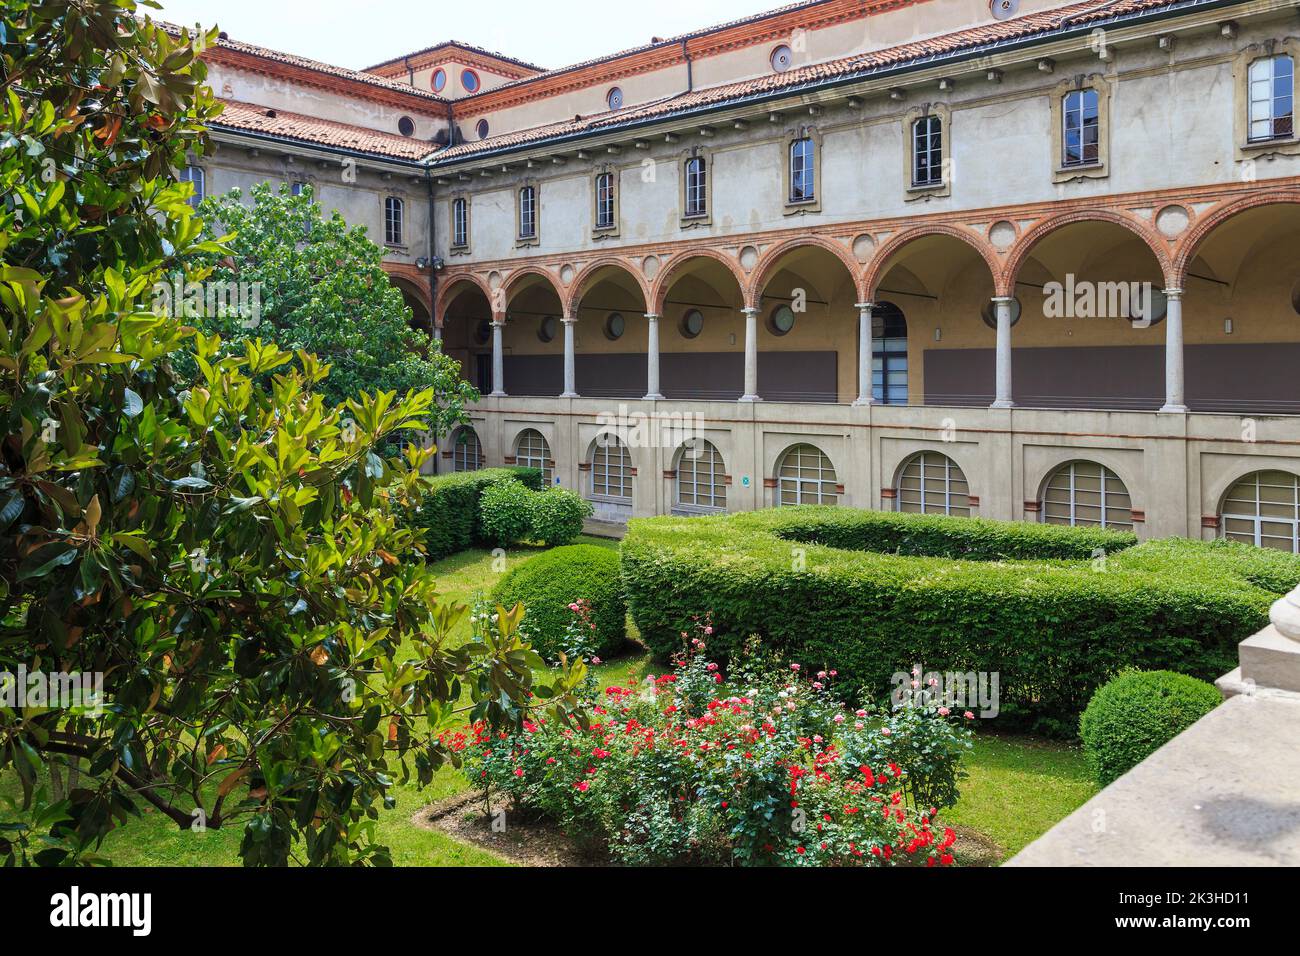 MILAN, ITALY - MAY 19, 2018: It is a cloister of the former medieval Benedictine monastery, in which the Museum of Science and Technology. Stock Photo